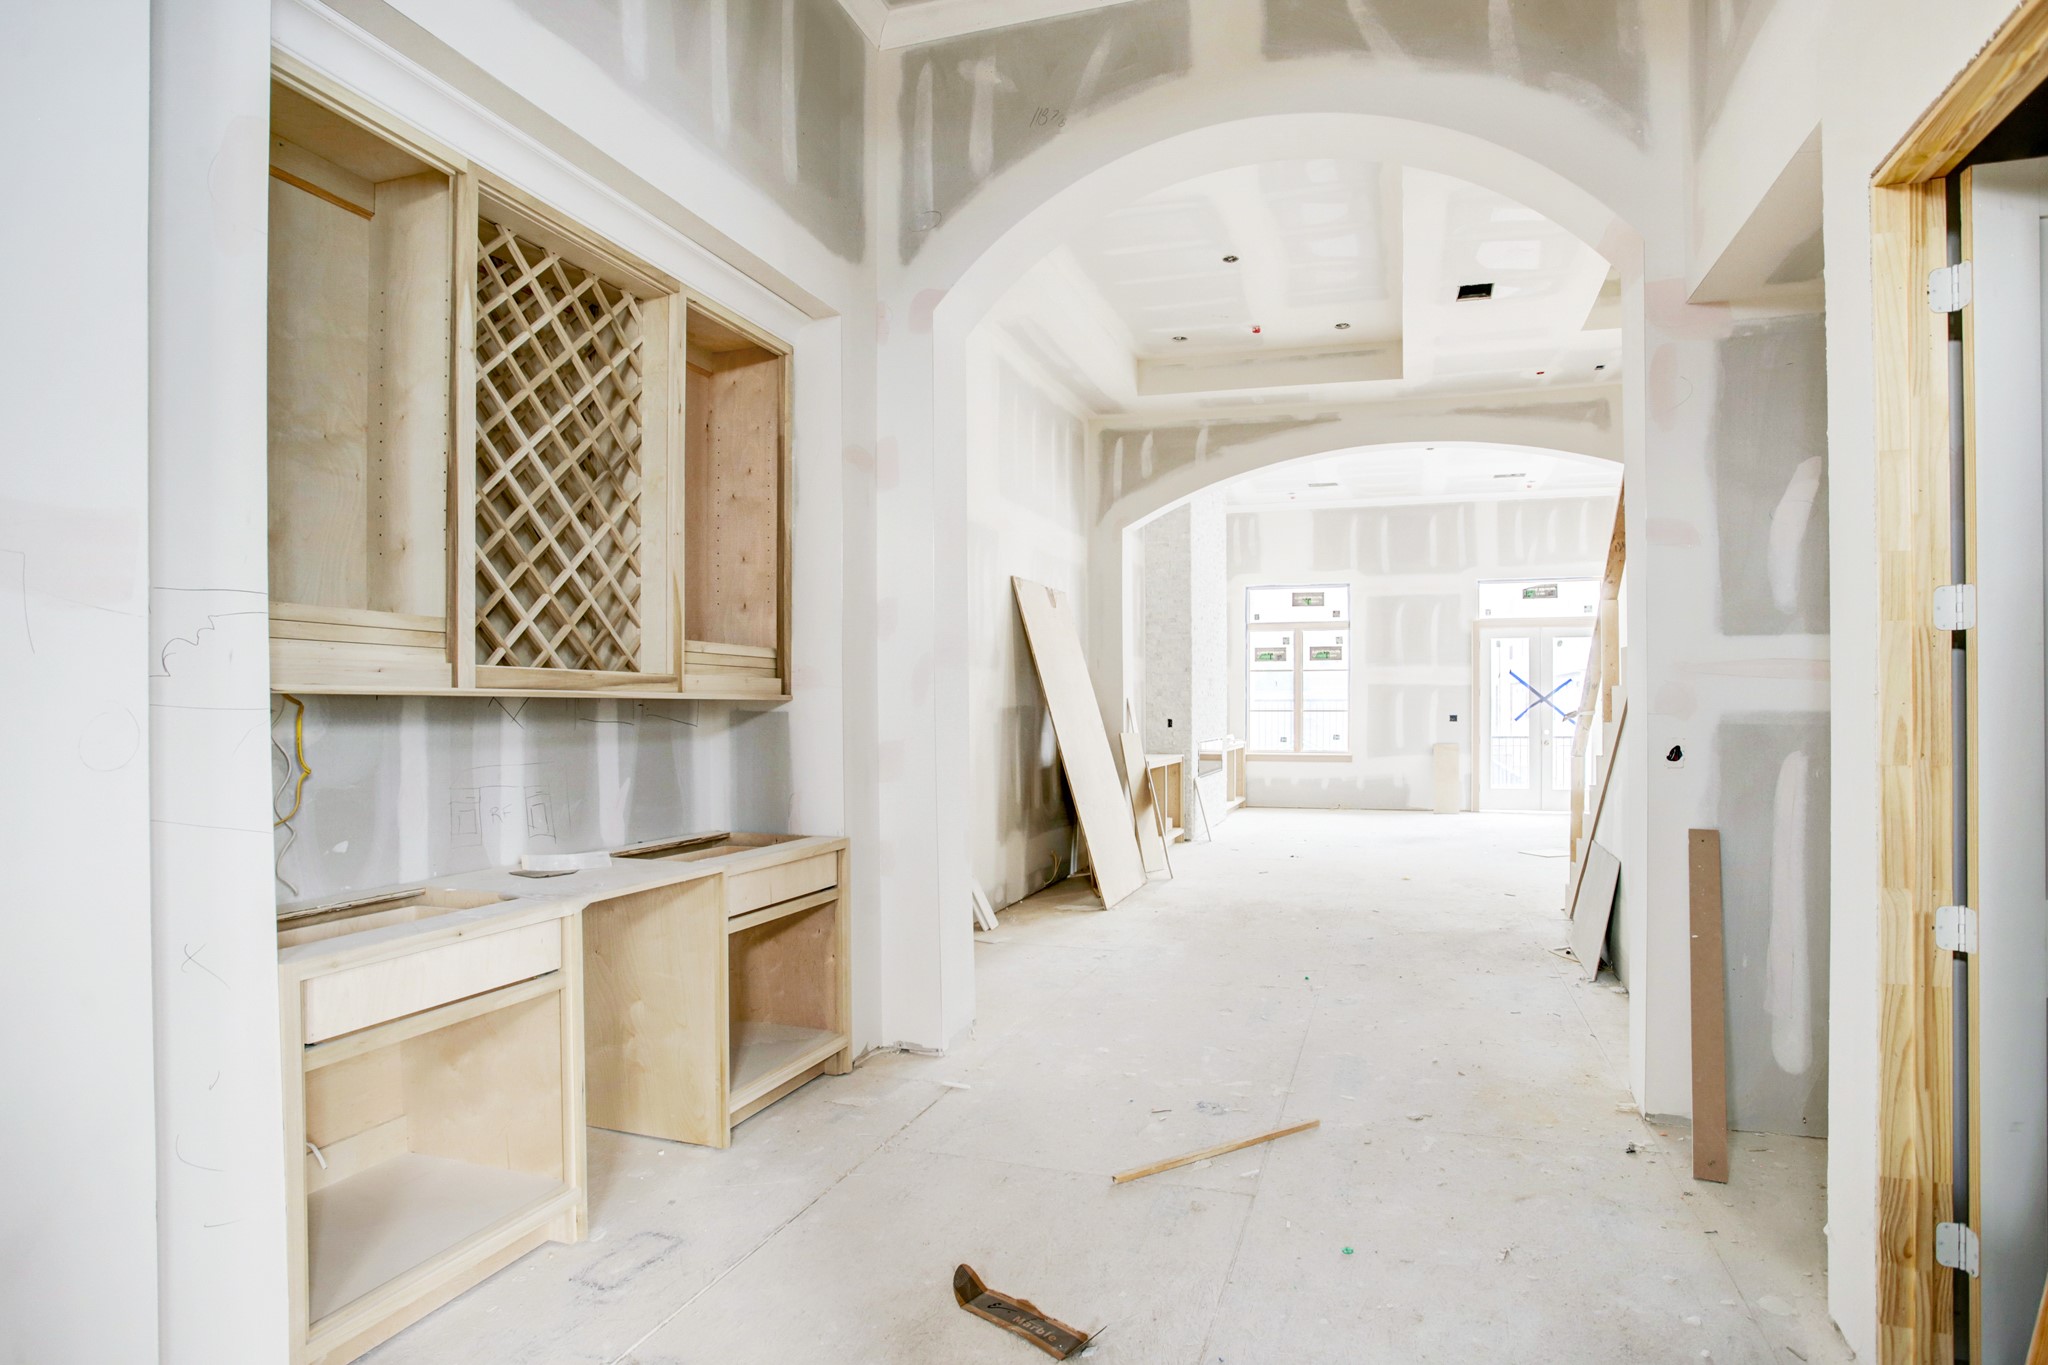 Spacious formal dining area ready to entertain guests! 
*Construction progress as of January 27th, 2023.